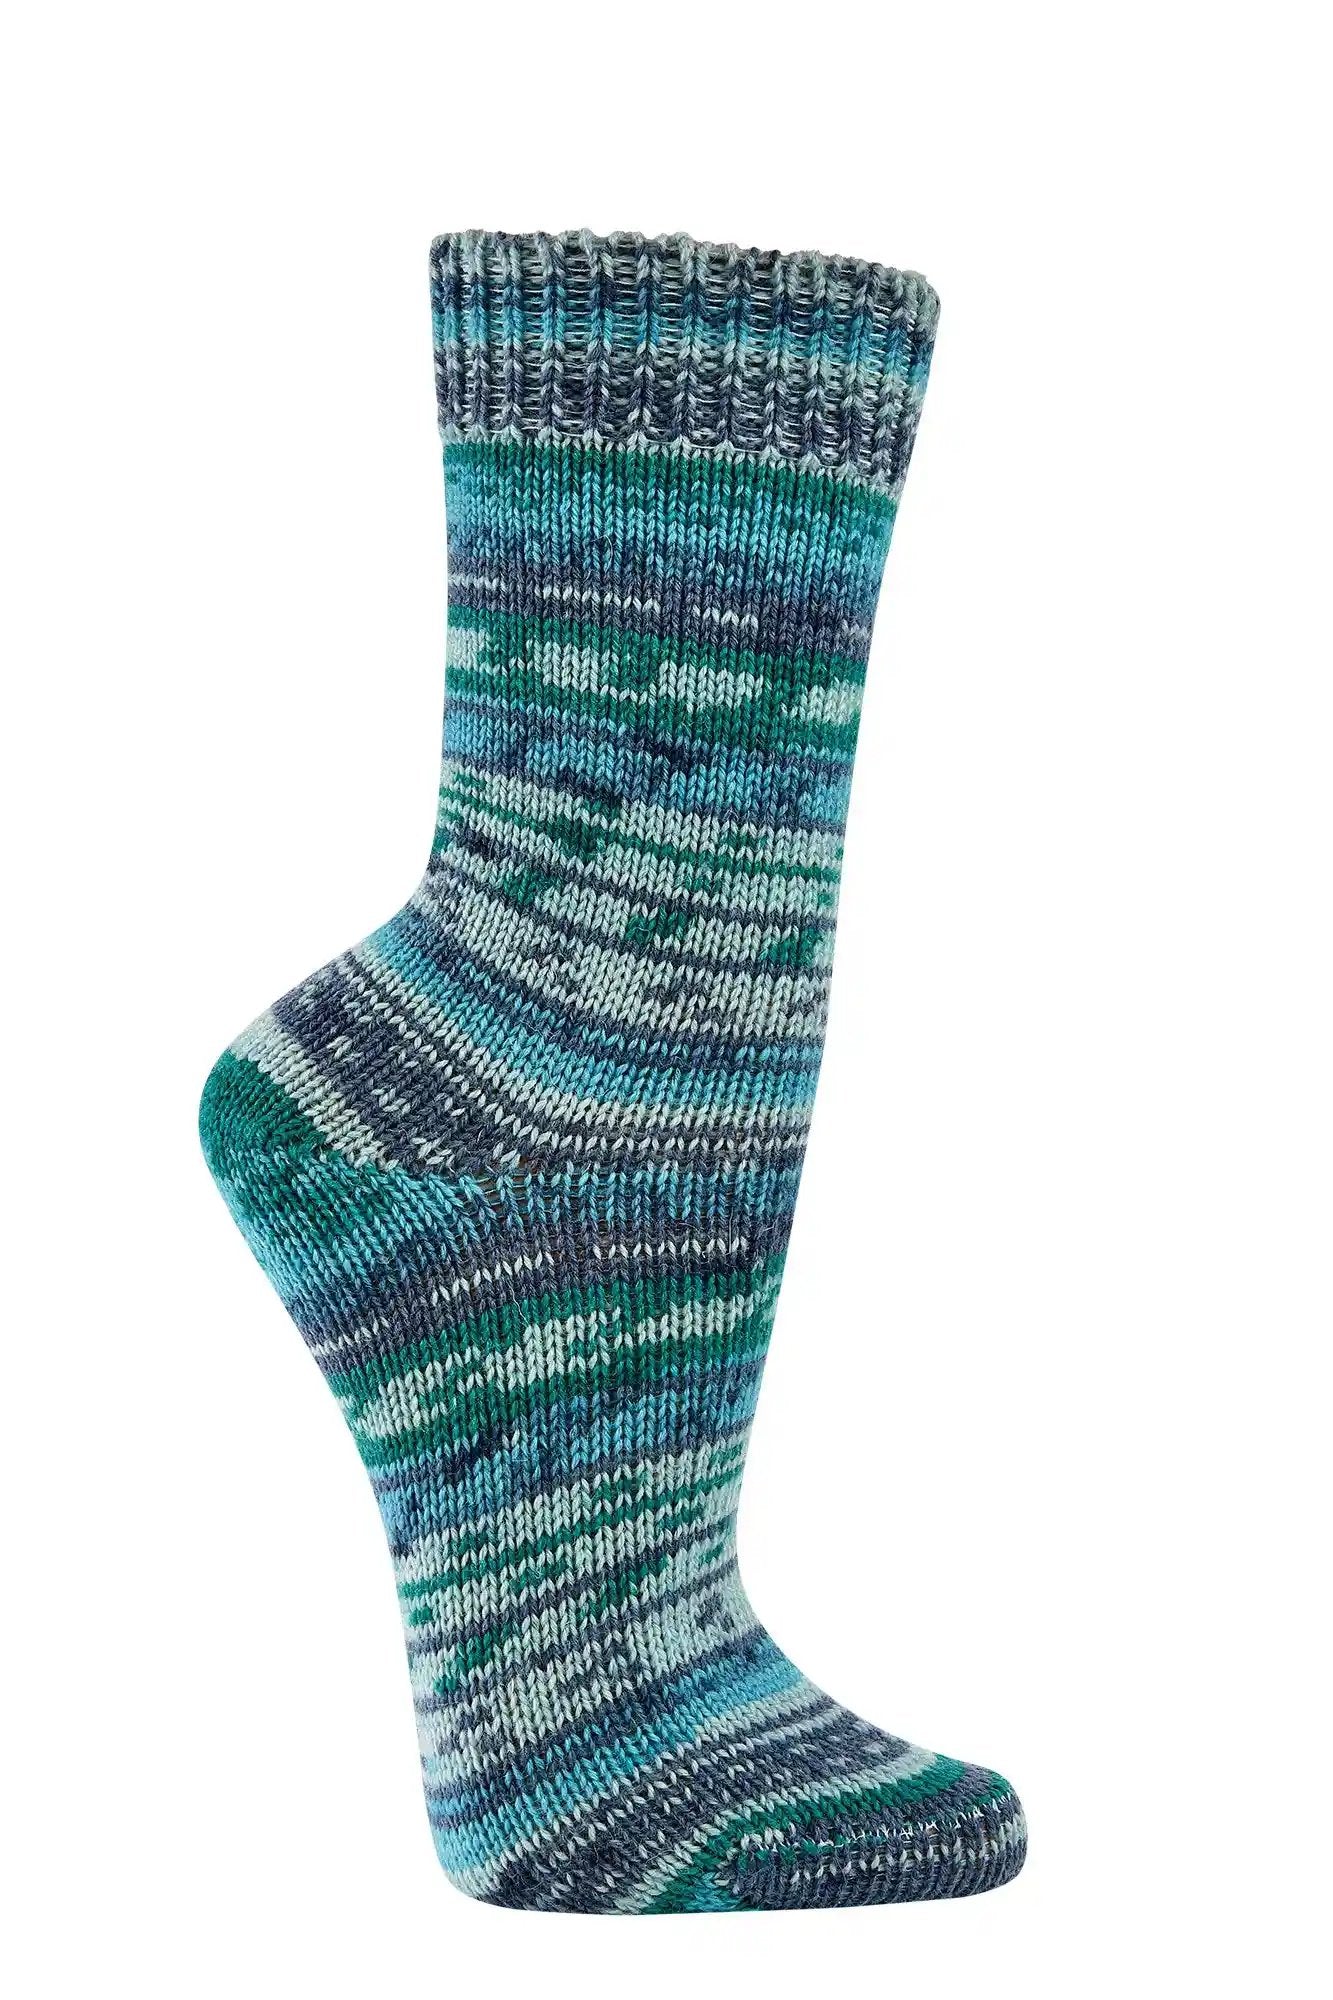 2 or 4 pairs of warm socks with 70% wool in many beautiful colors just like grandma's